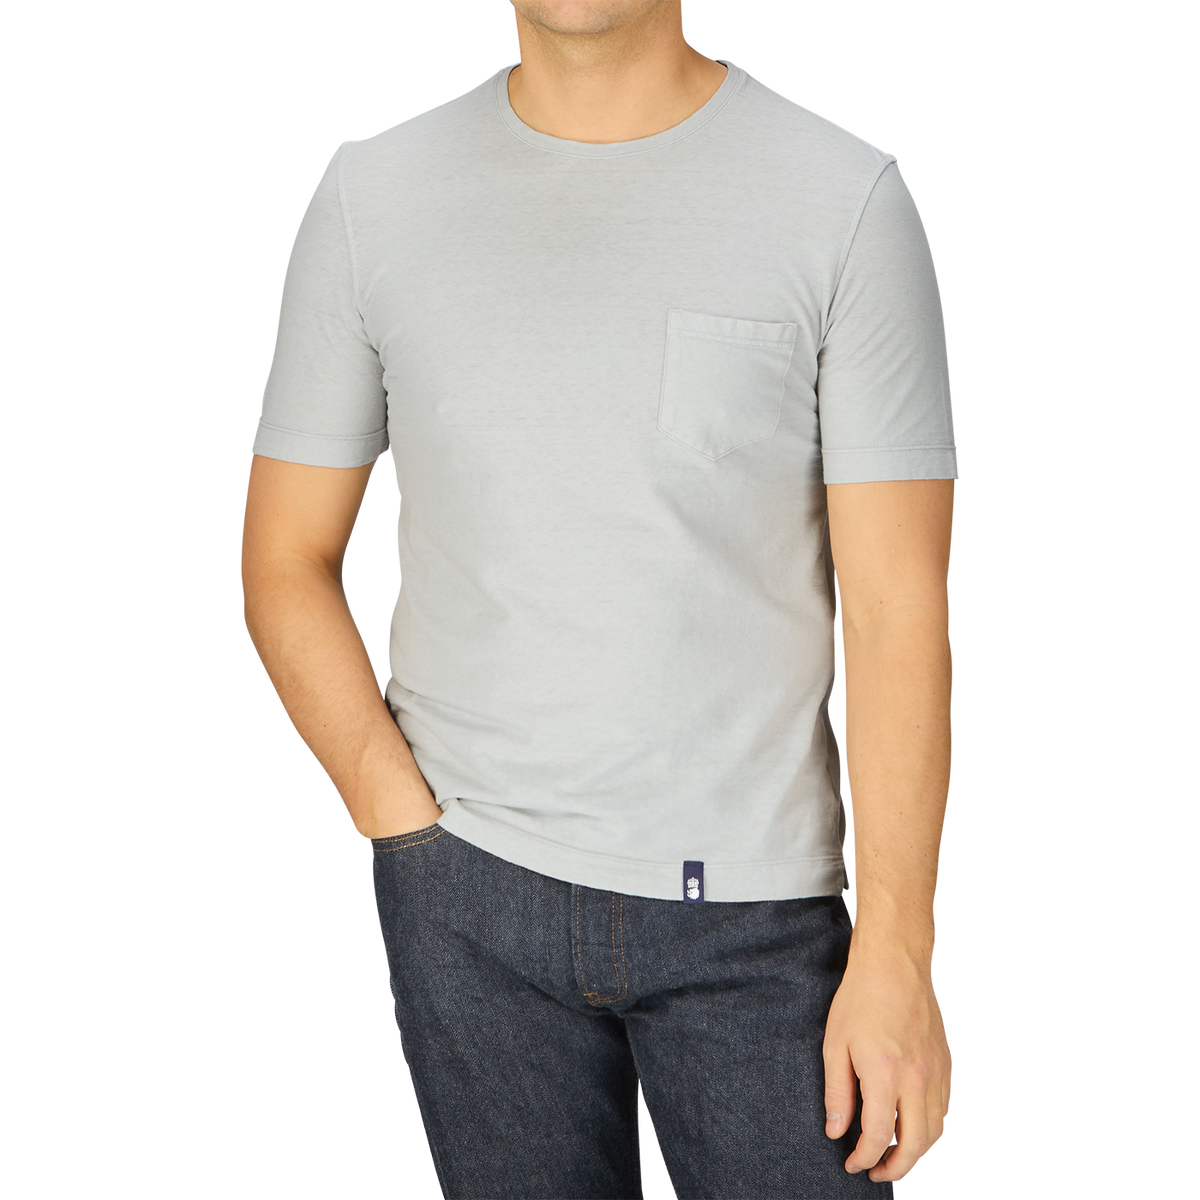 A man wearing a Light Grey Cotton Linen T-Shirt and jeans from Italy.